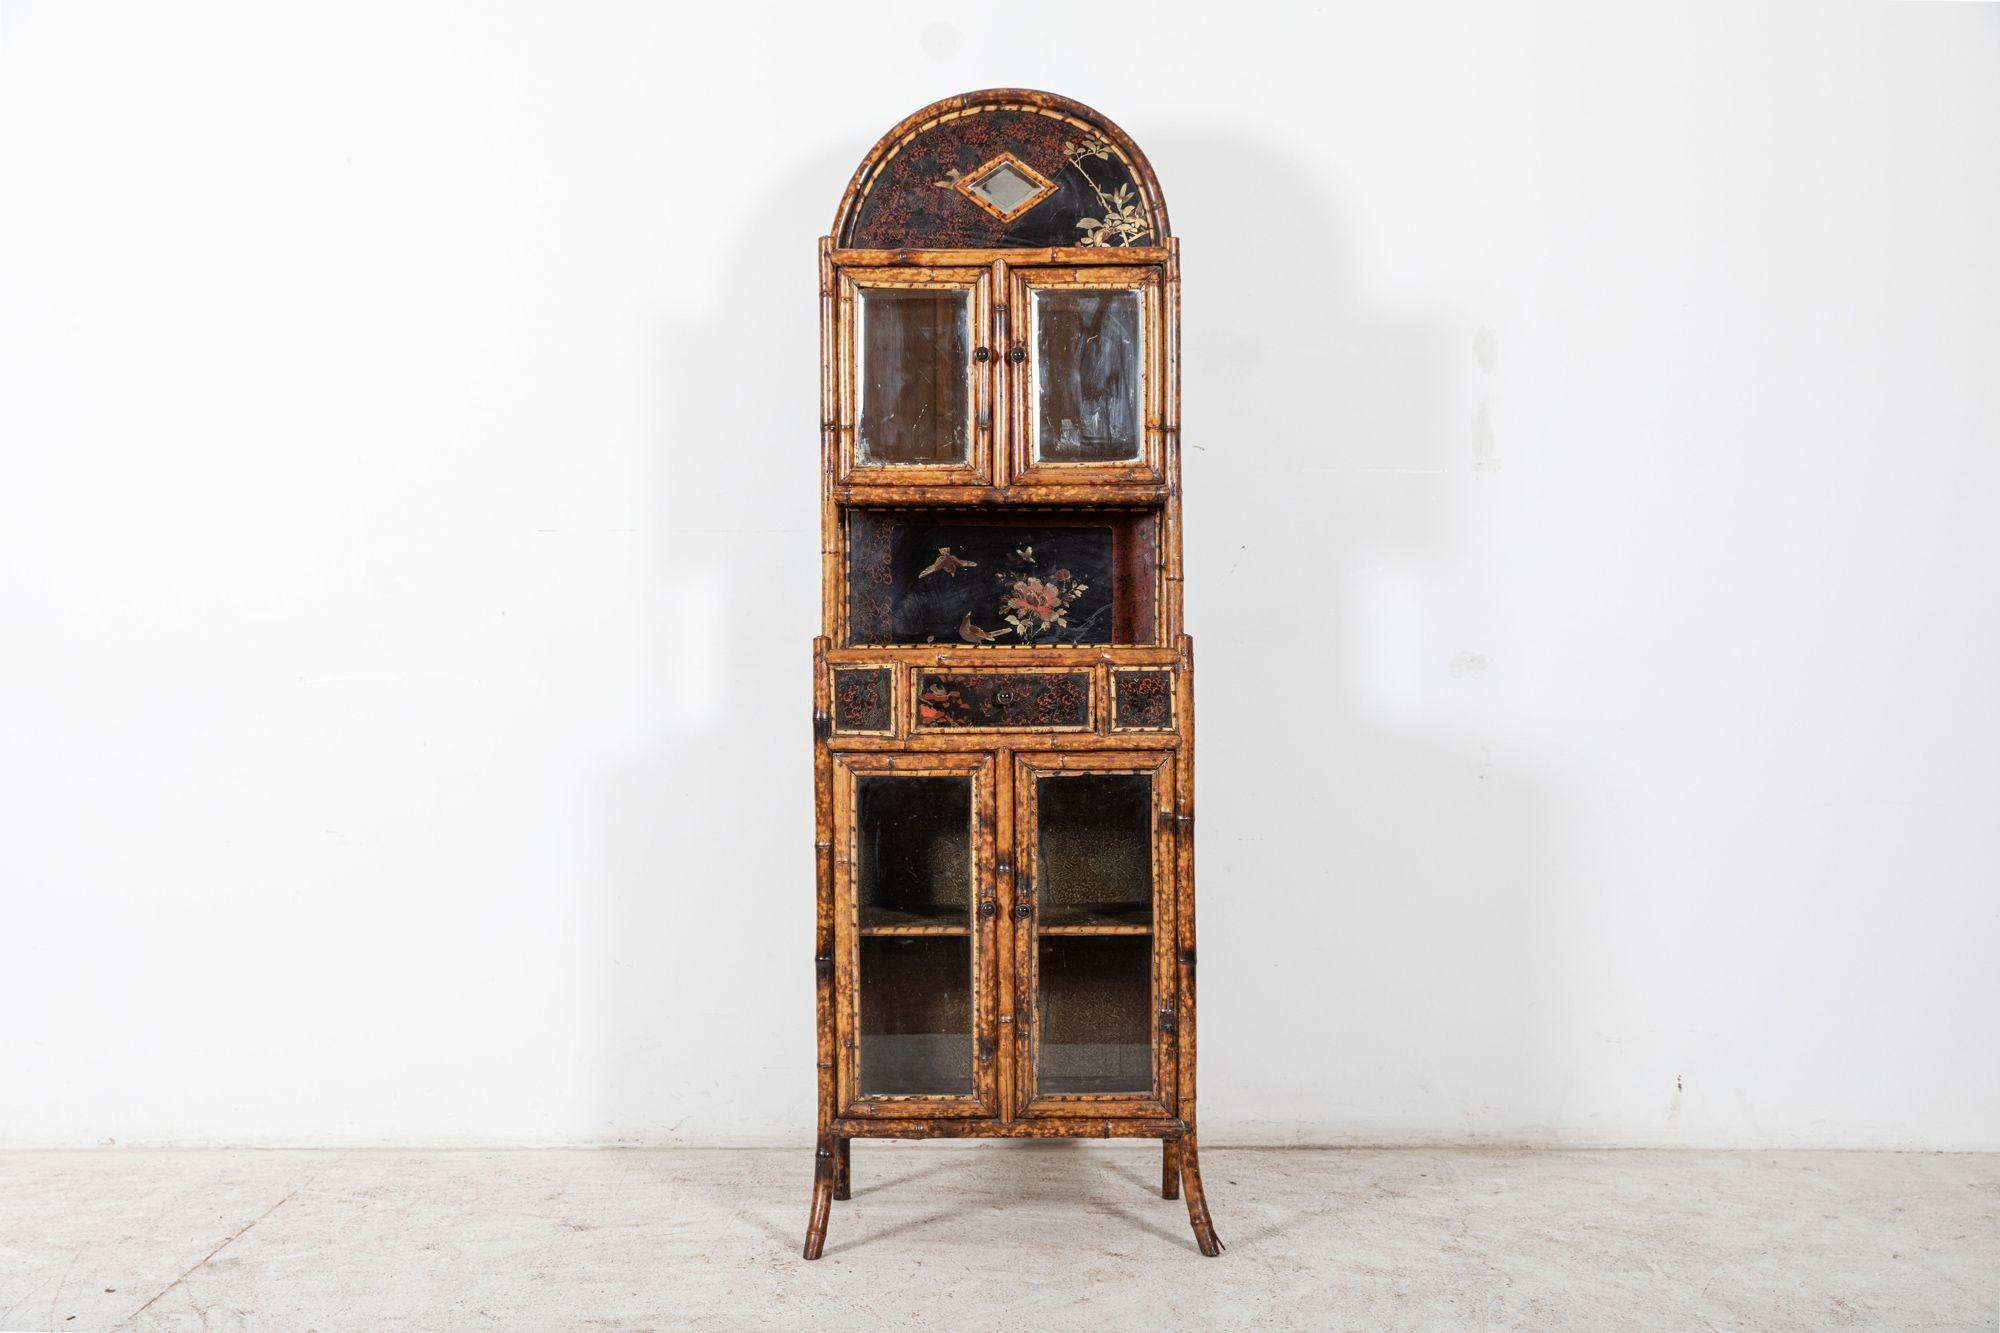 Circa 1870

19thC English bamboo Glazed cabinet

A fine unrestored aesthetic movement style etagere cabinet features an arched mirrored glazed cabinet top above a central glazed cabinet with shelved interior, drawer and original papered